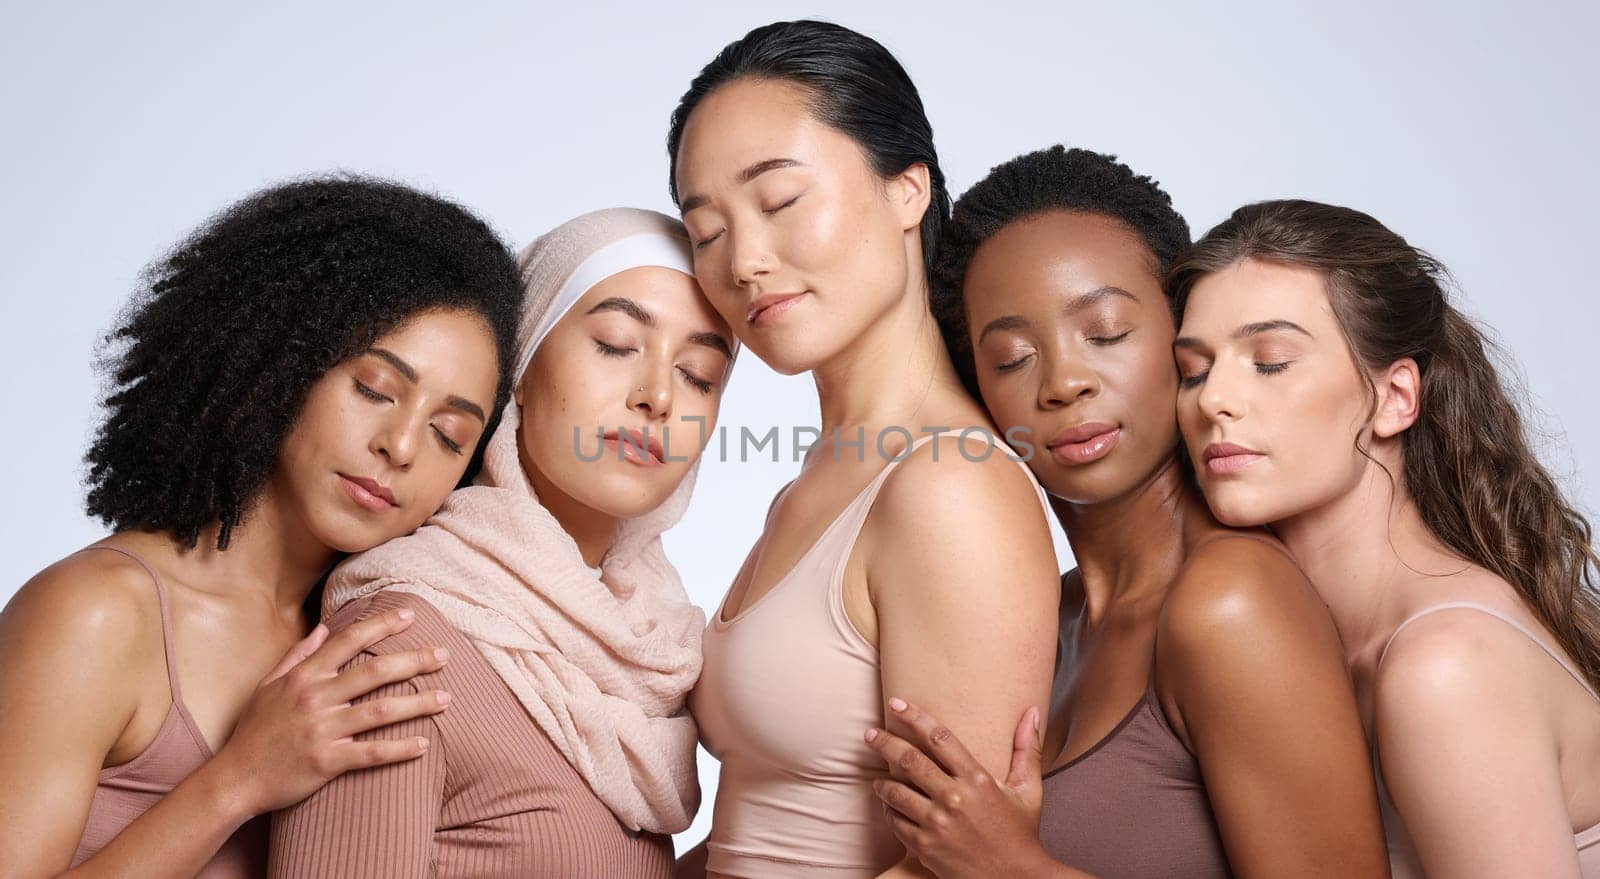 Face, beauty and group of women with eyes closed in studio isolated on gray background. Diversity, skincare cosmetics or makeup of girls, female models or friends posing for inclusion or self love